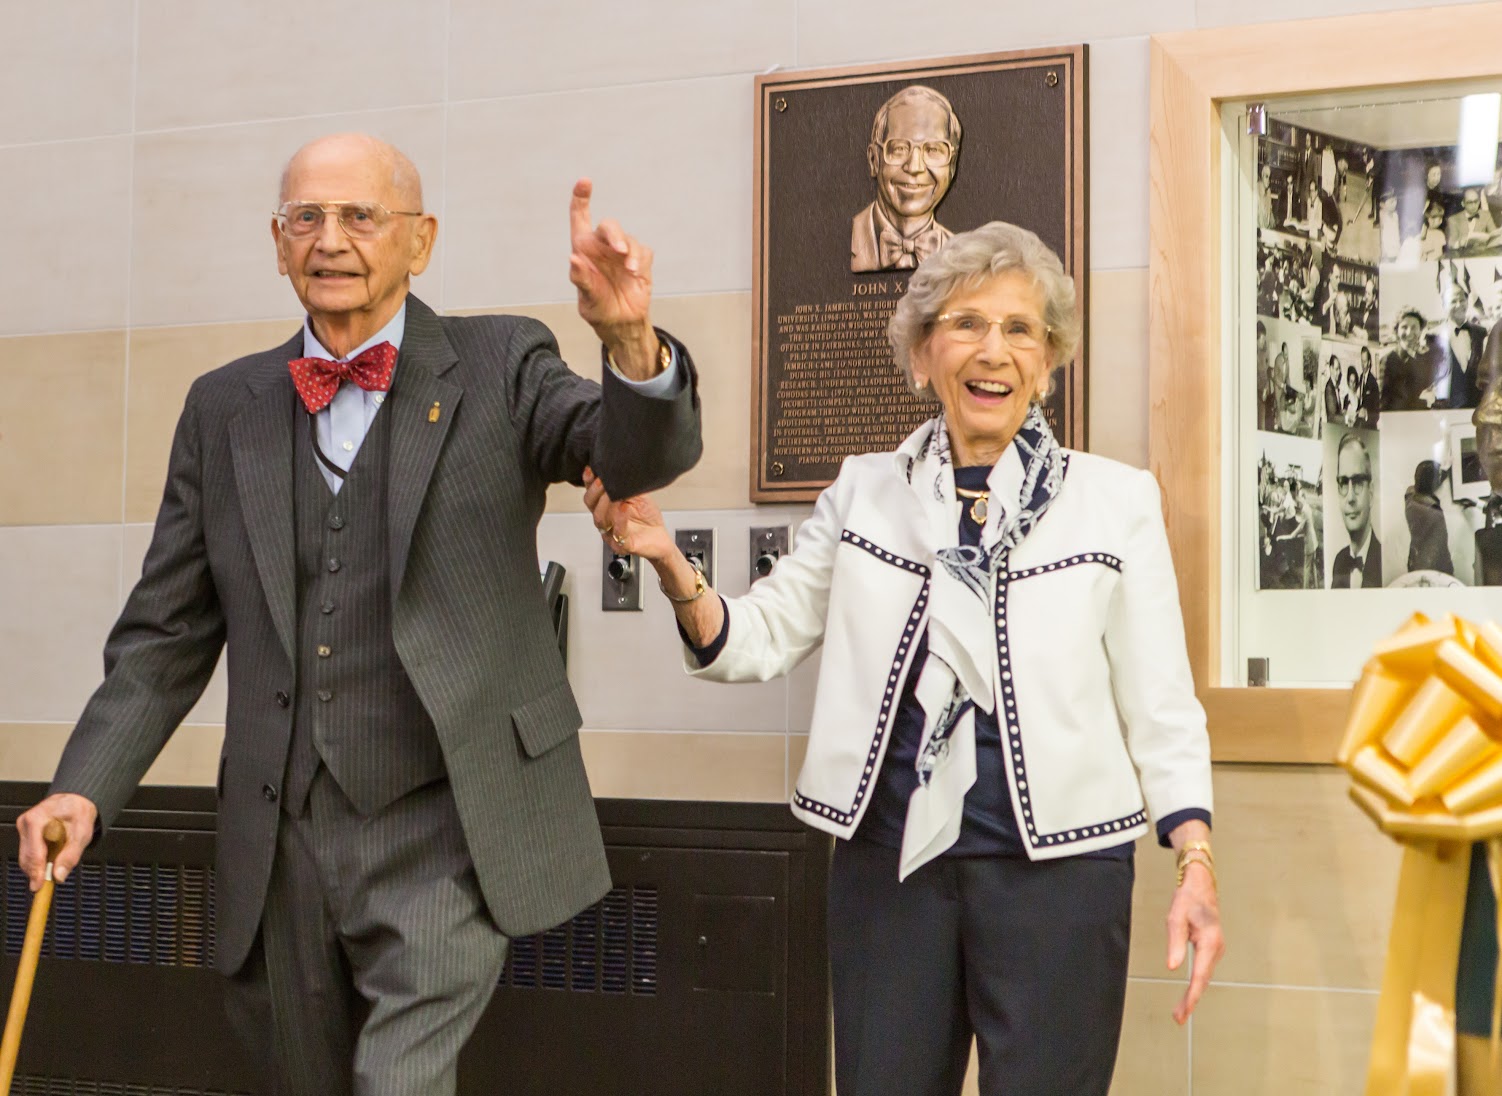 John and June Jamrich at the 2014 ribbon-cutting ceremony for the new Jamrich Hall.